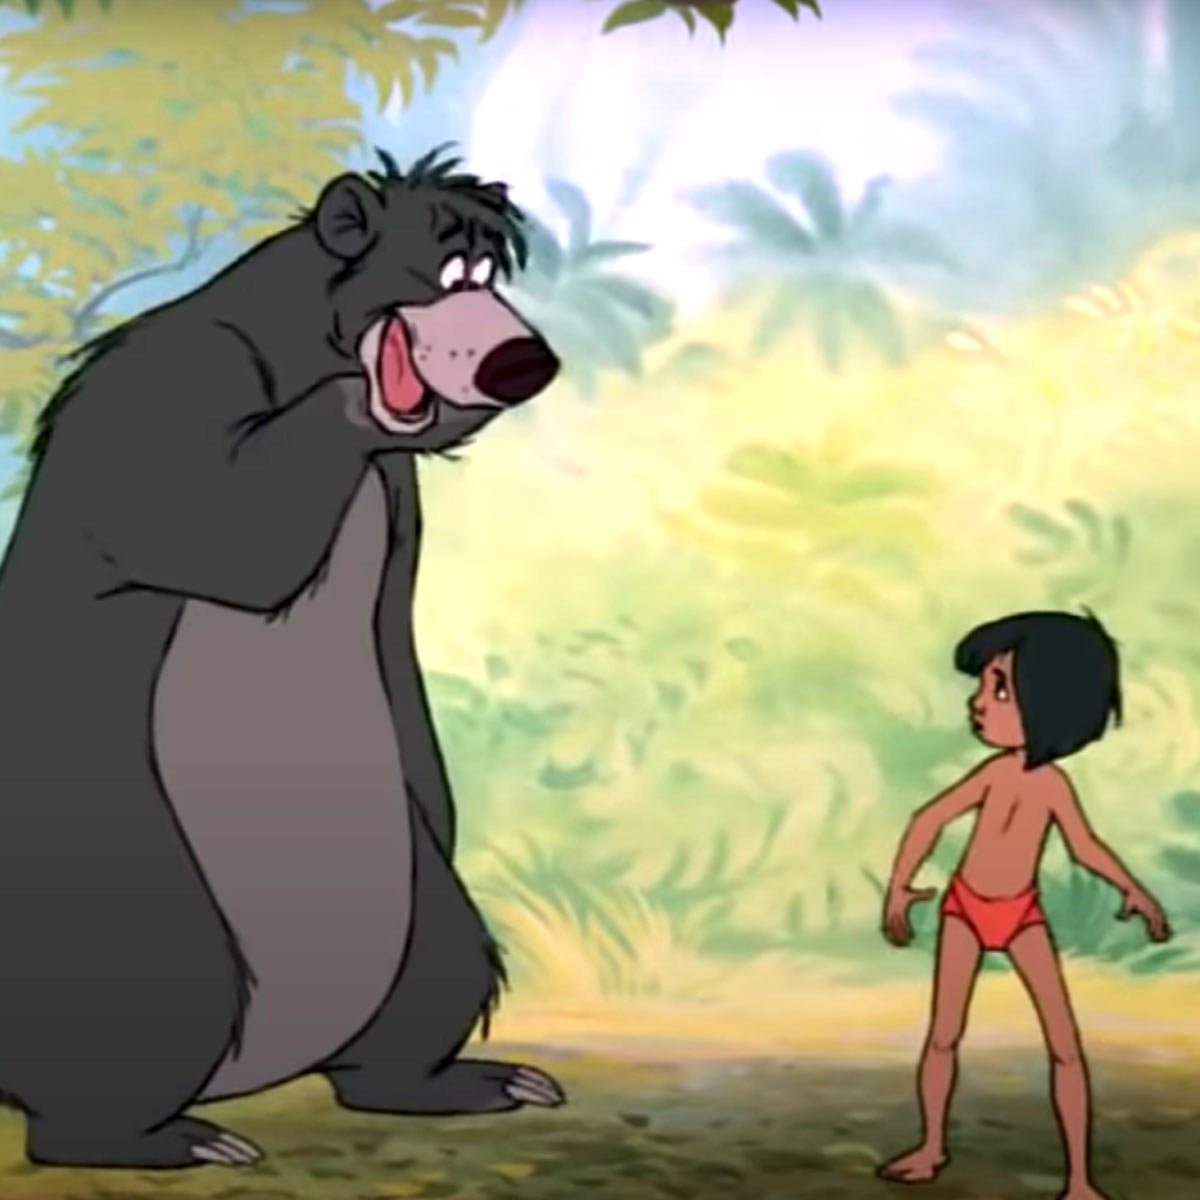 Play The Bare Necessities (The Jungle Book)